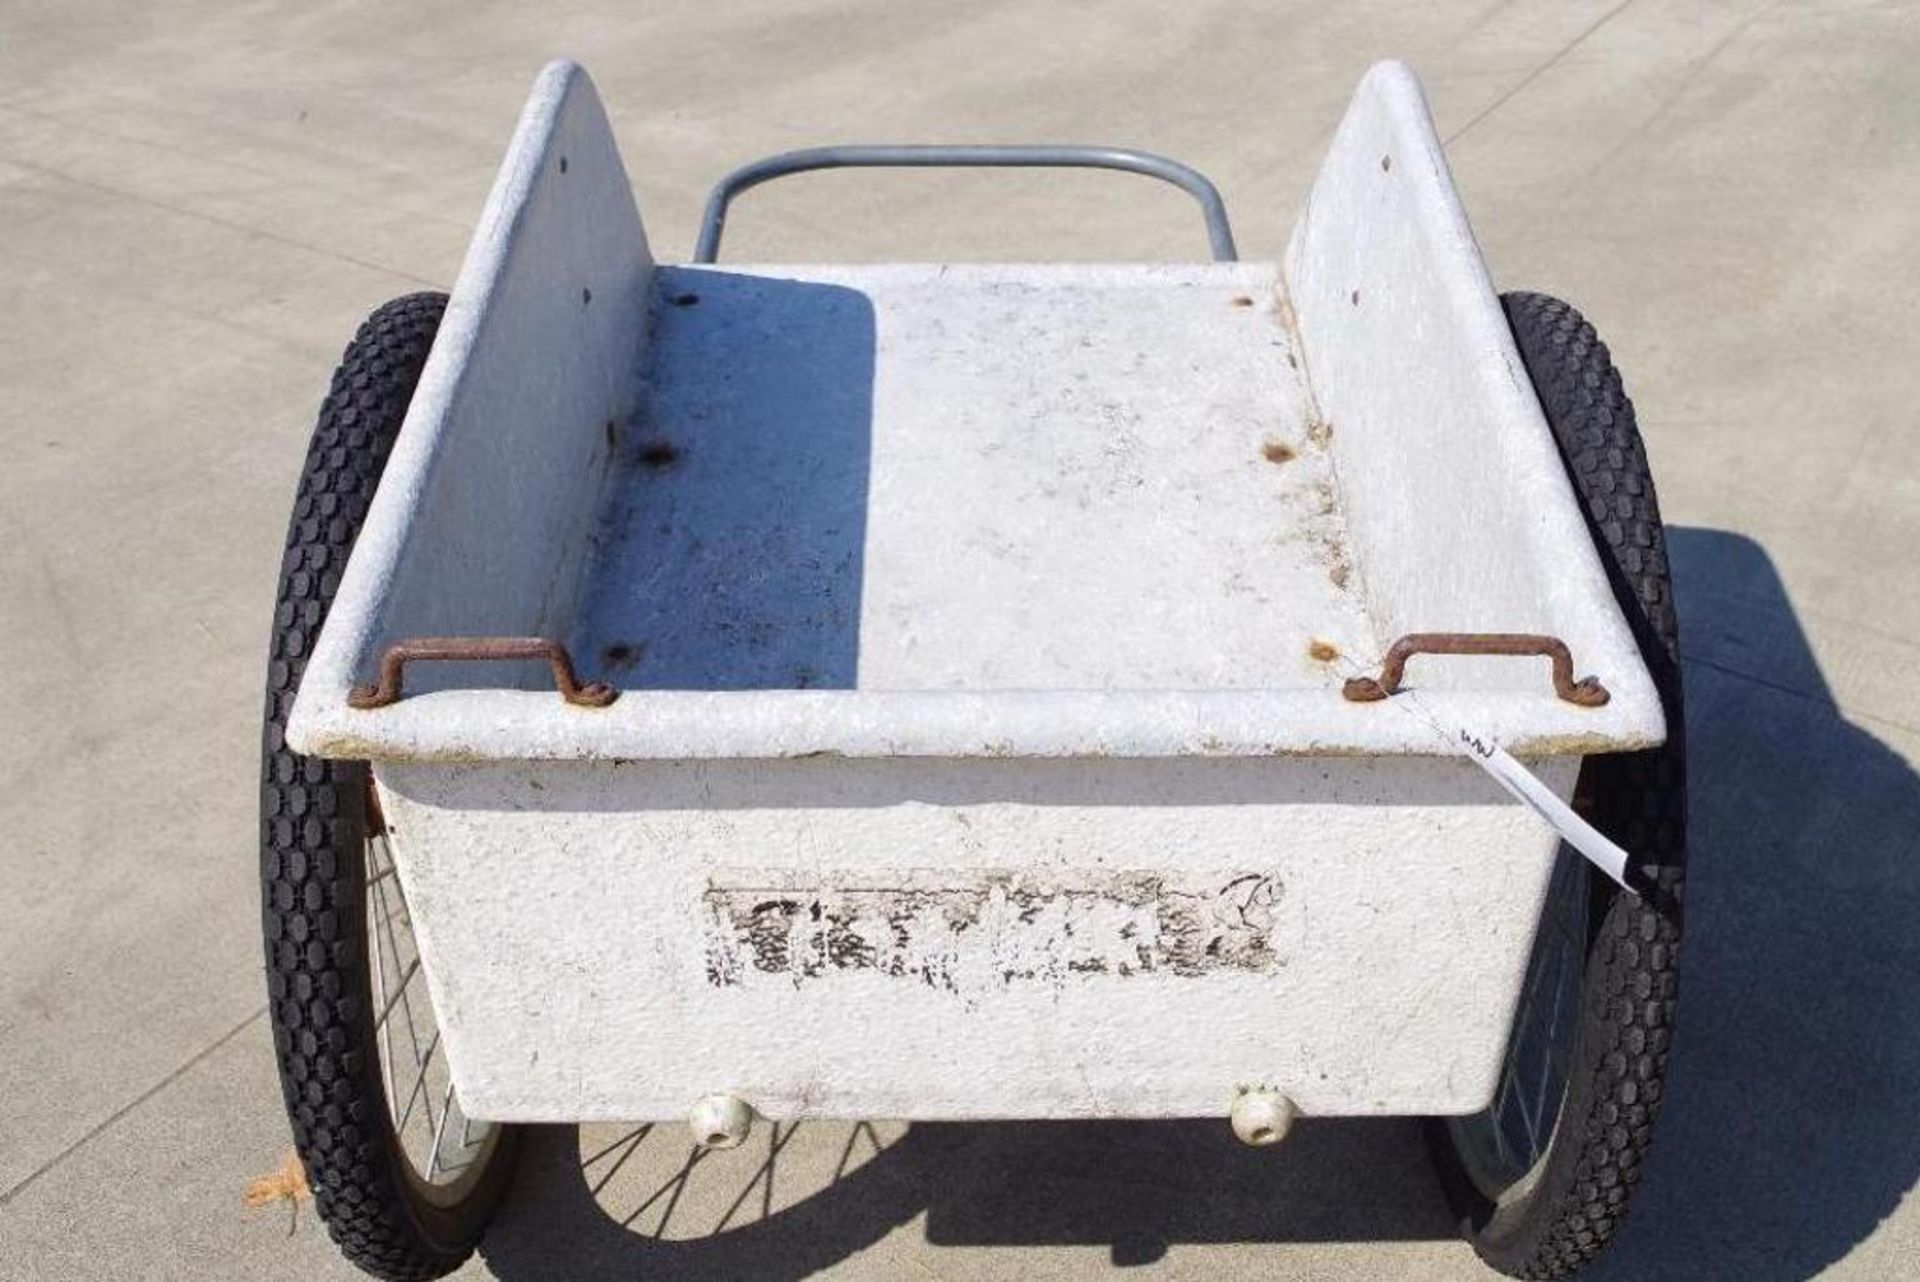 Garden Cart w/ 2-Pneumatic Wheels (Approx. 26") & 26" x 44" Payload Area - Image 4 of 4